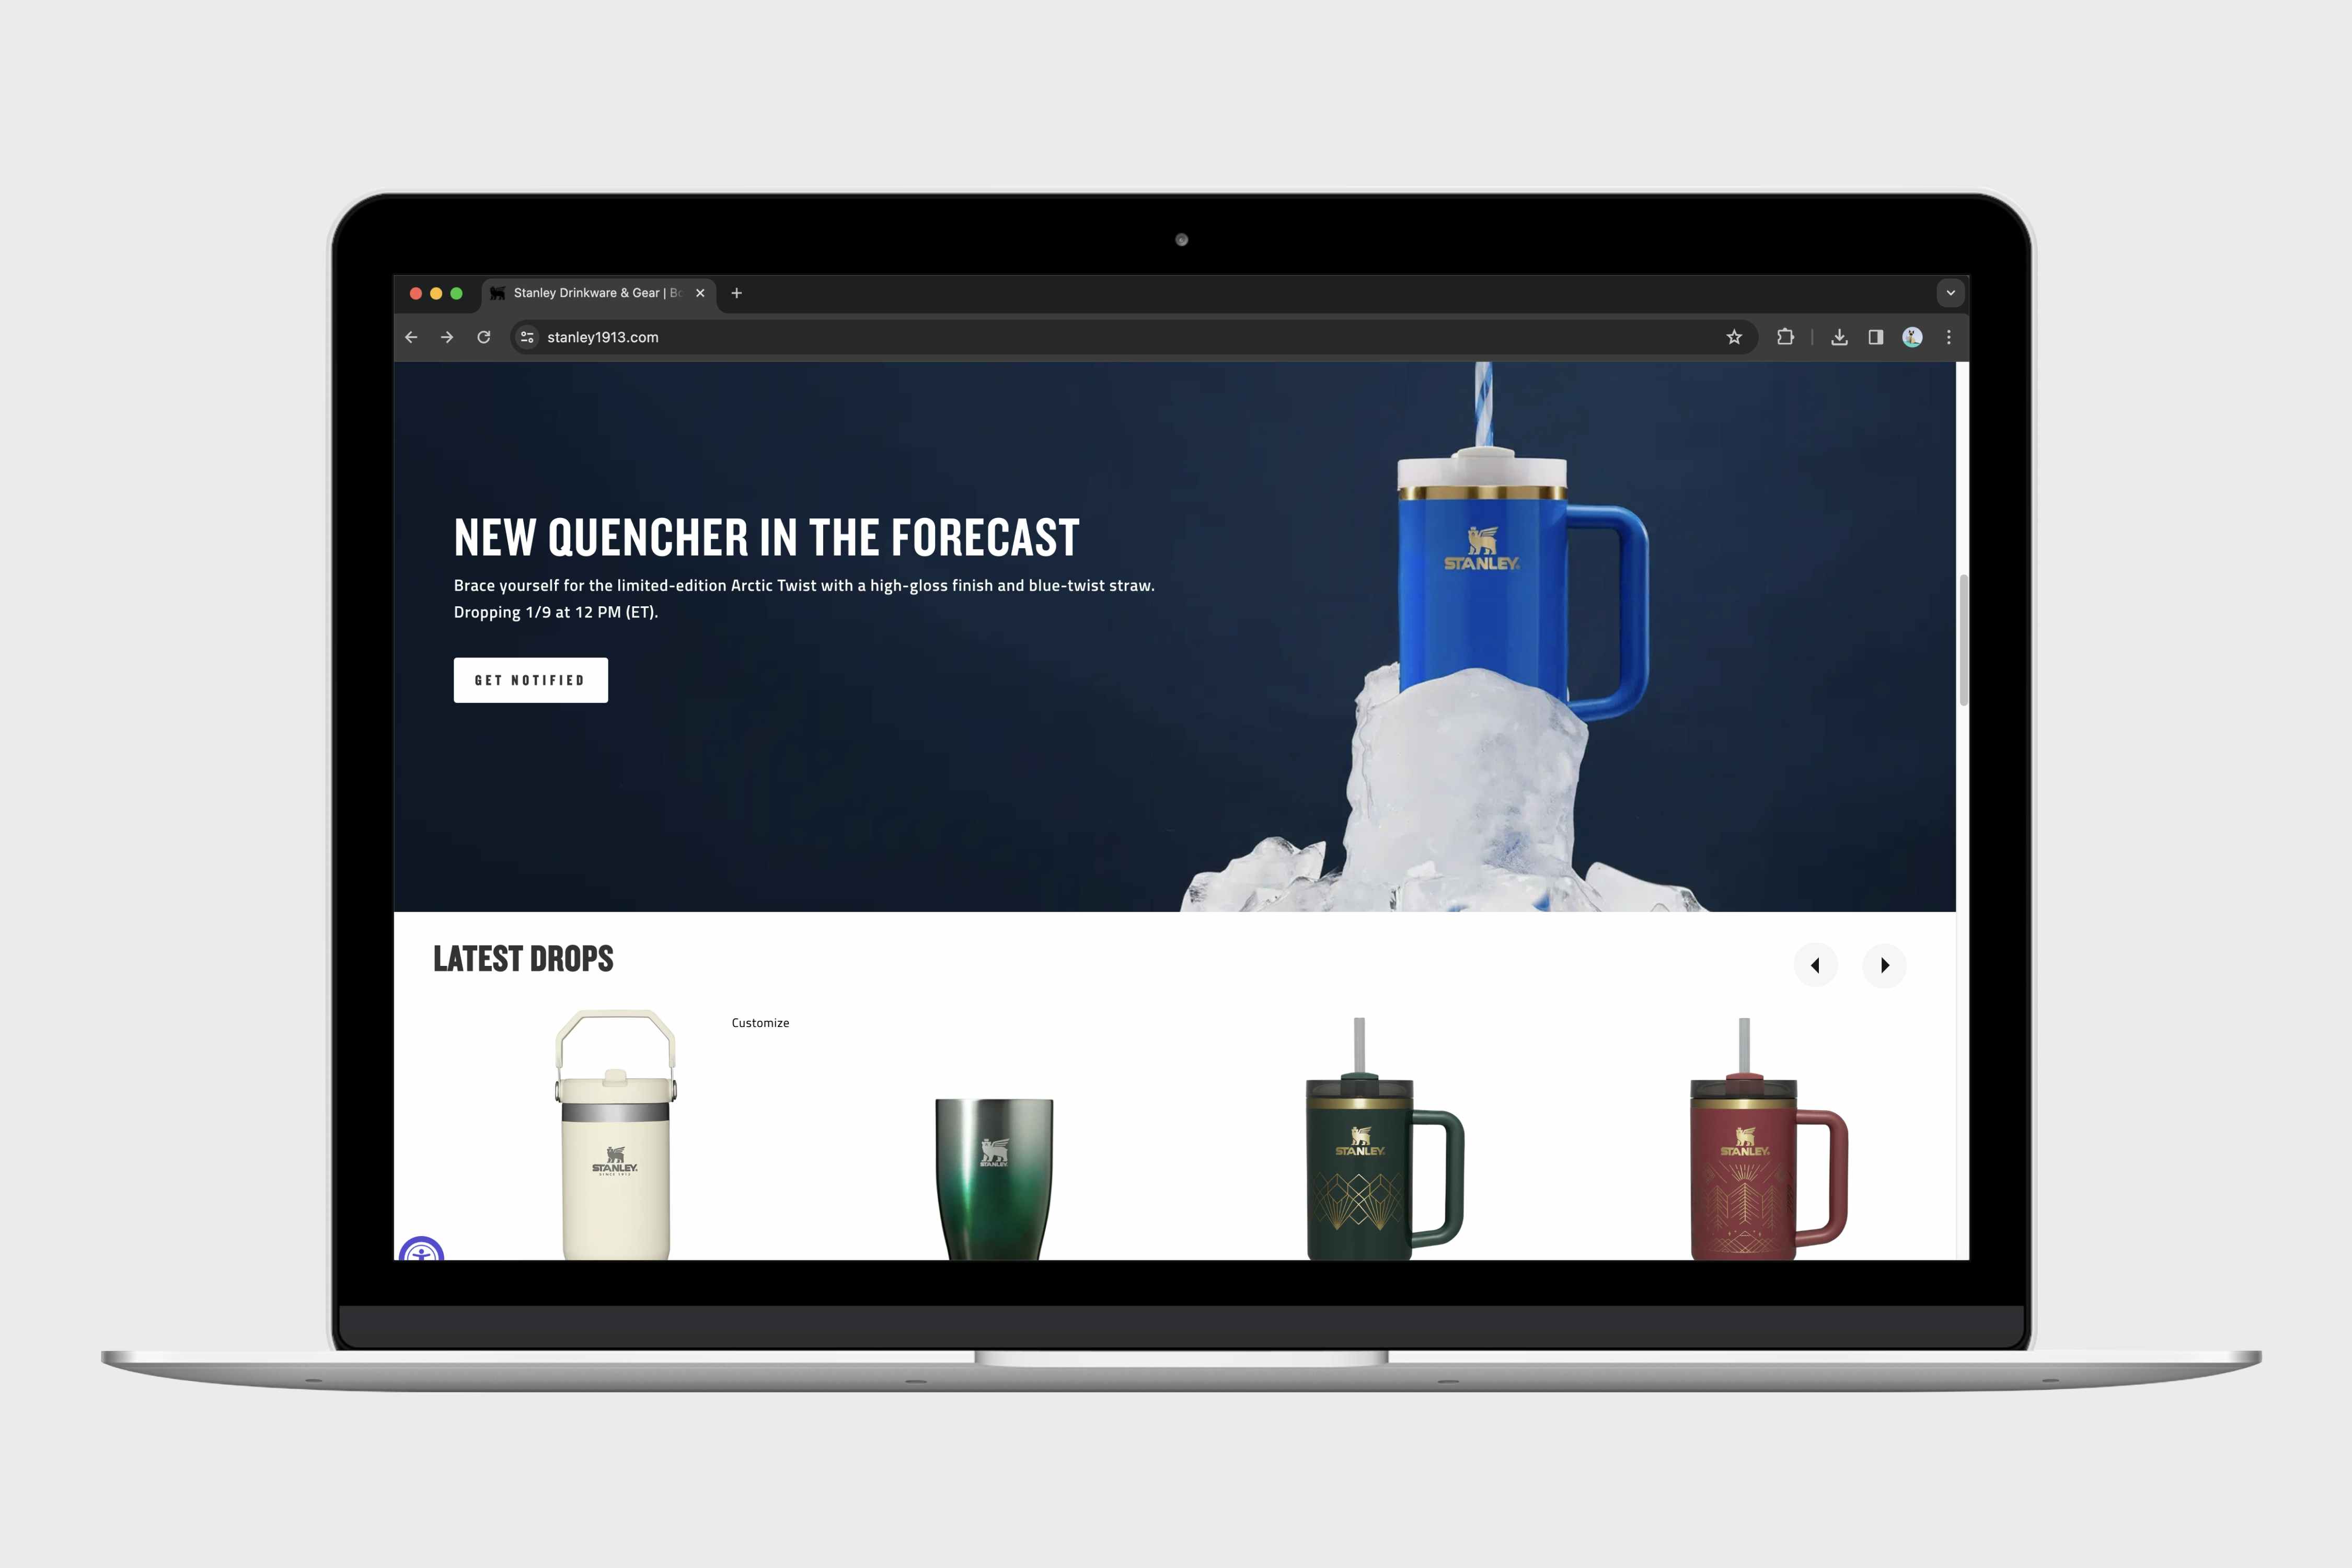 Stanley Quencher Tumbler Restock Guide: Where to Buy in July 2023